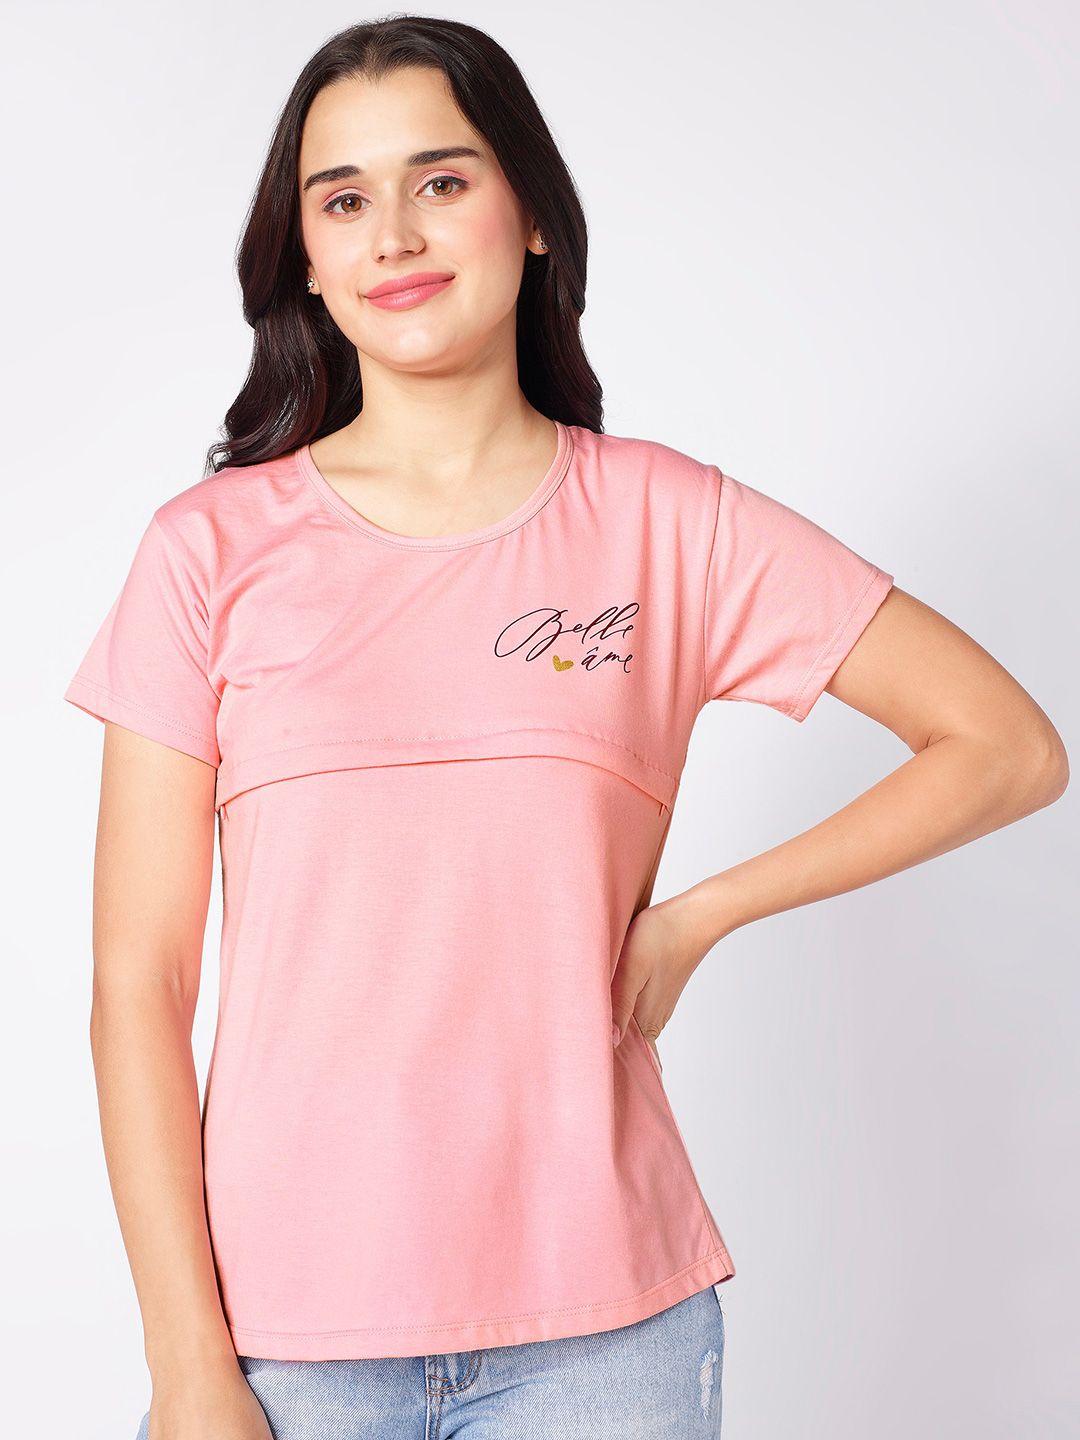 beebelle Round Neck Maternity T-shirt